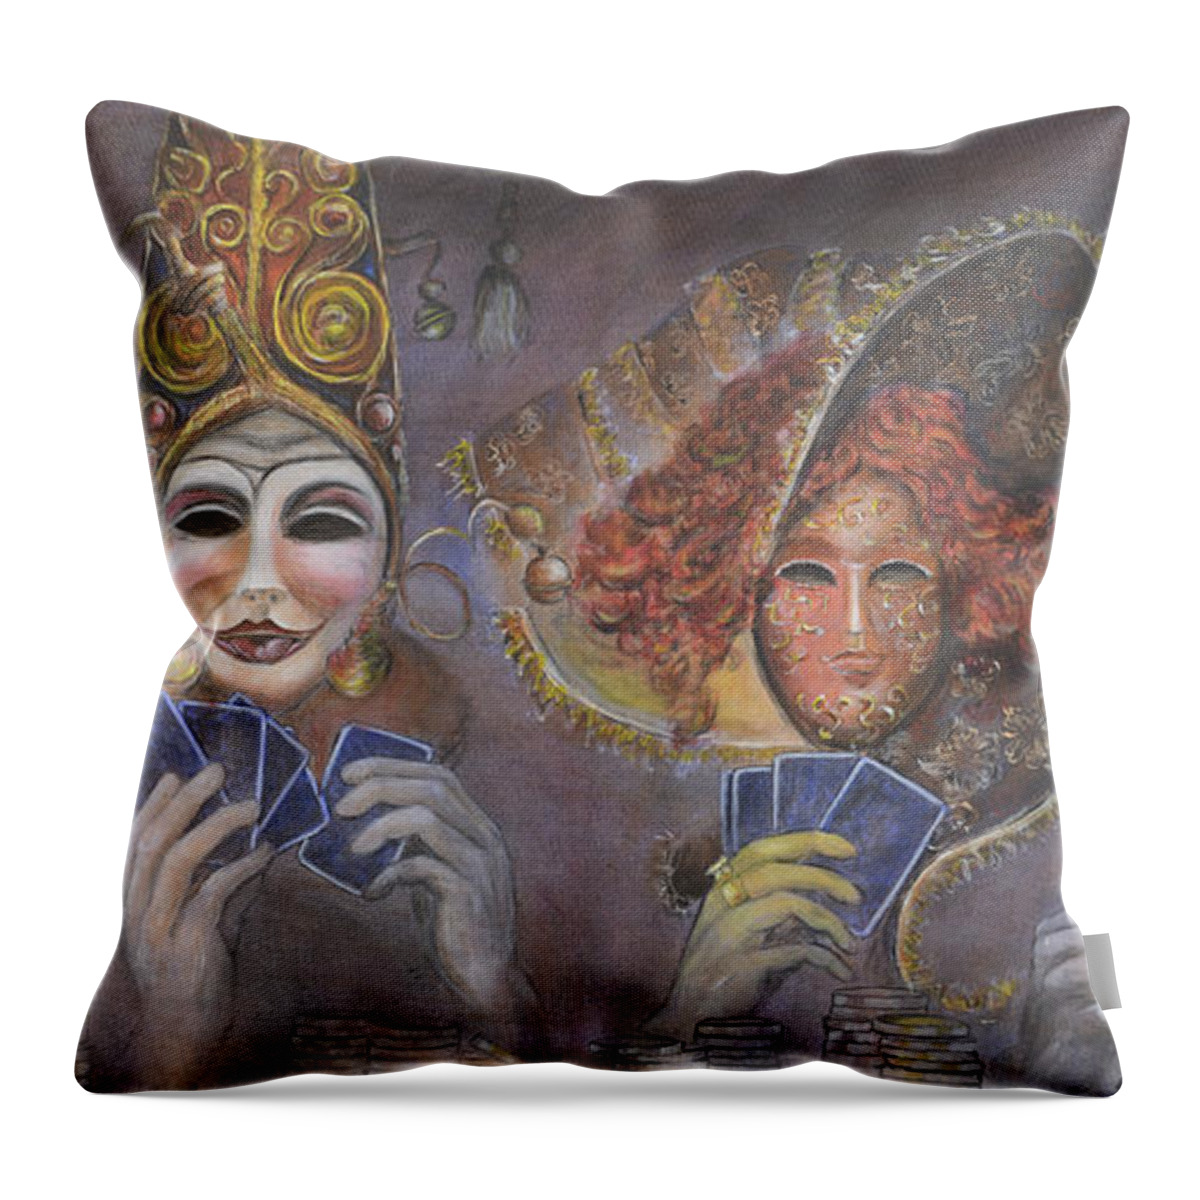 Poker Faces Throw Pillow featuring the painting Poker Game Faces by Nik Helbig